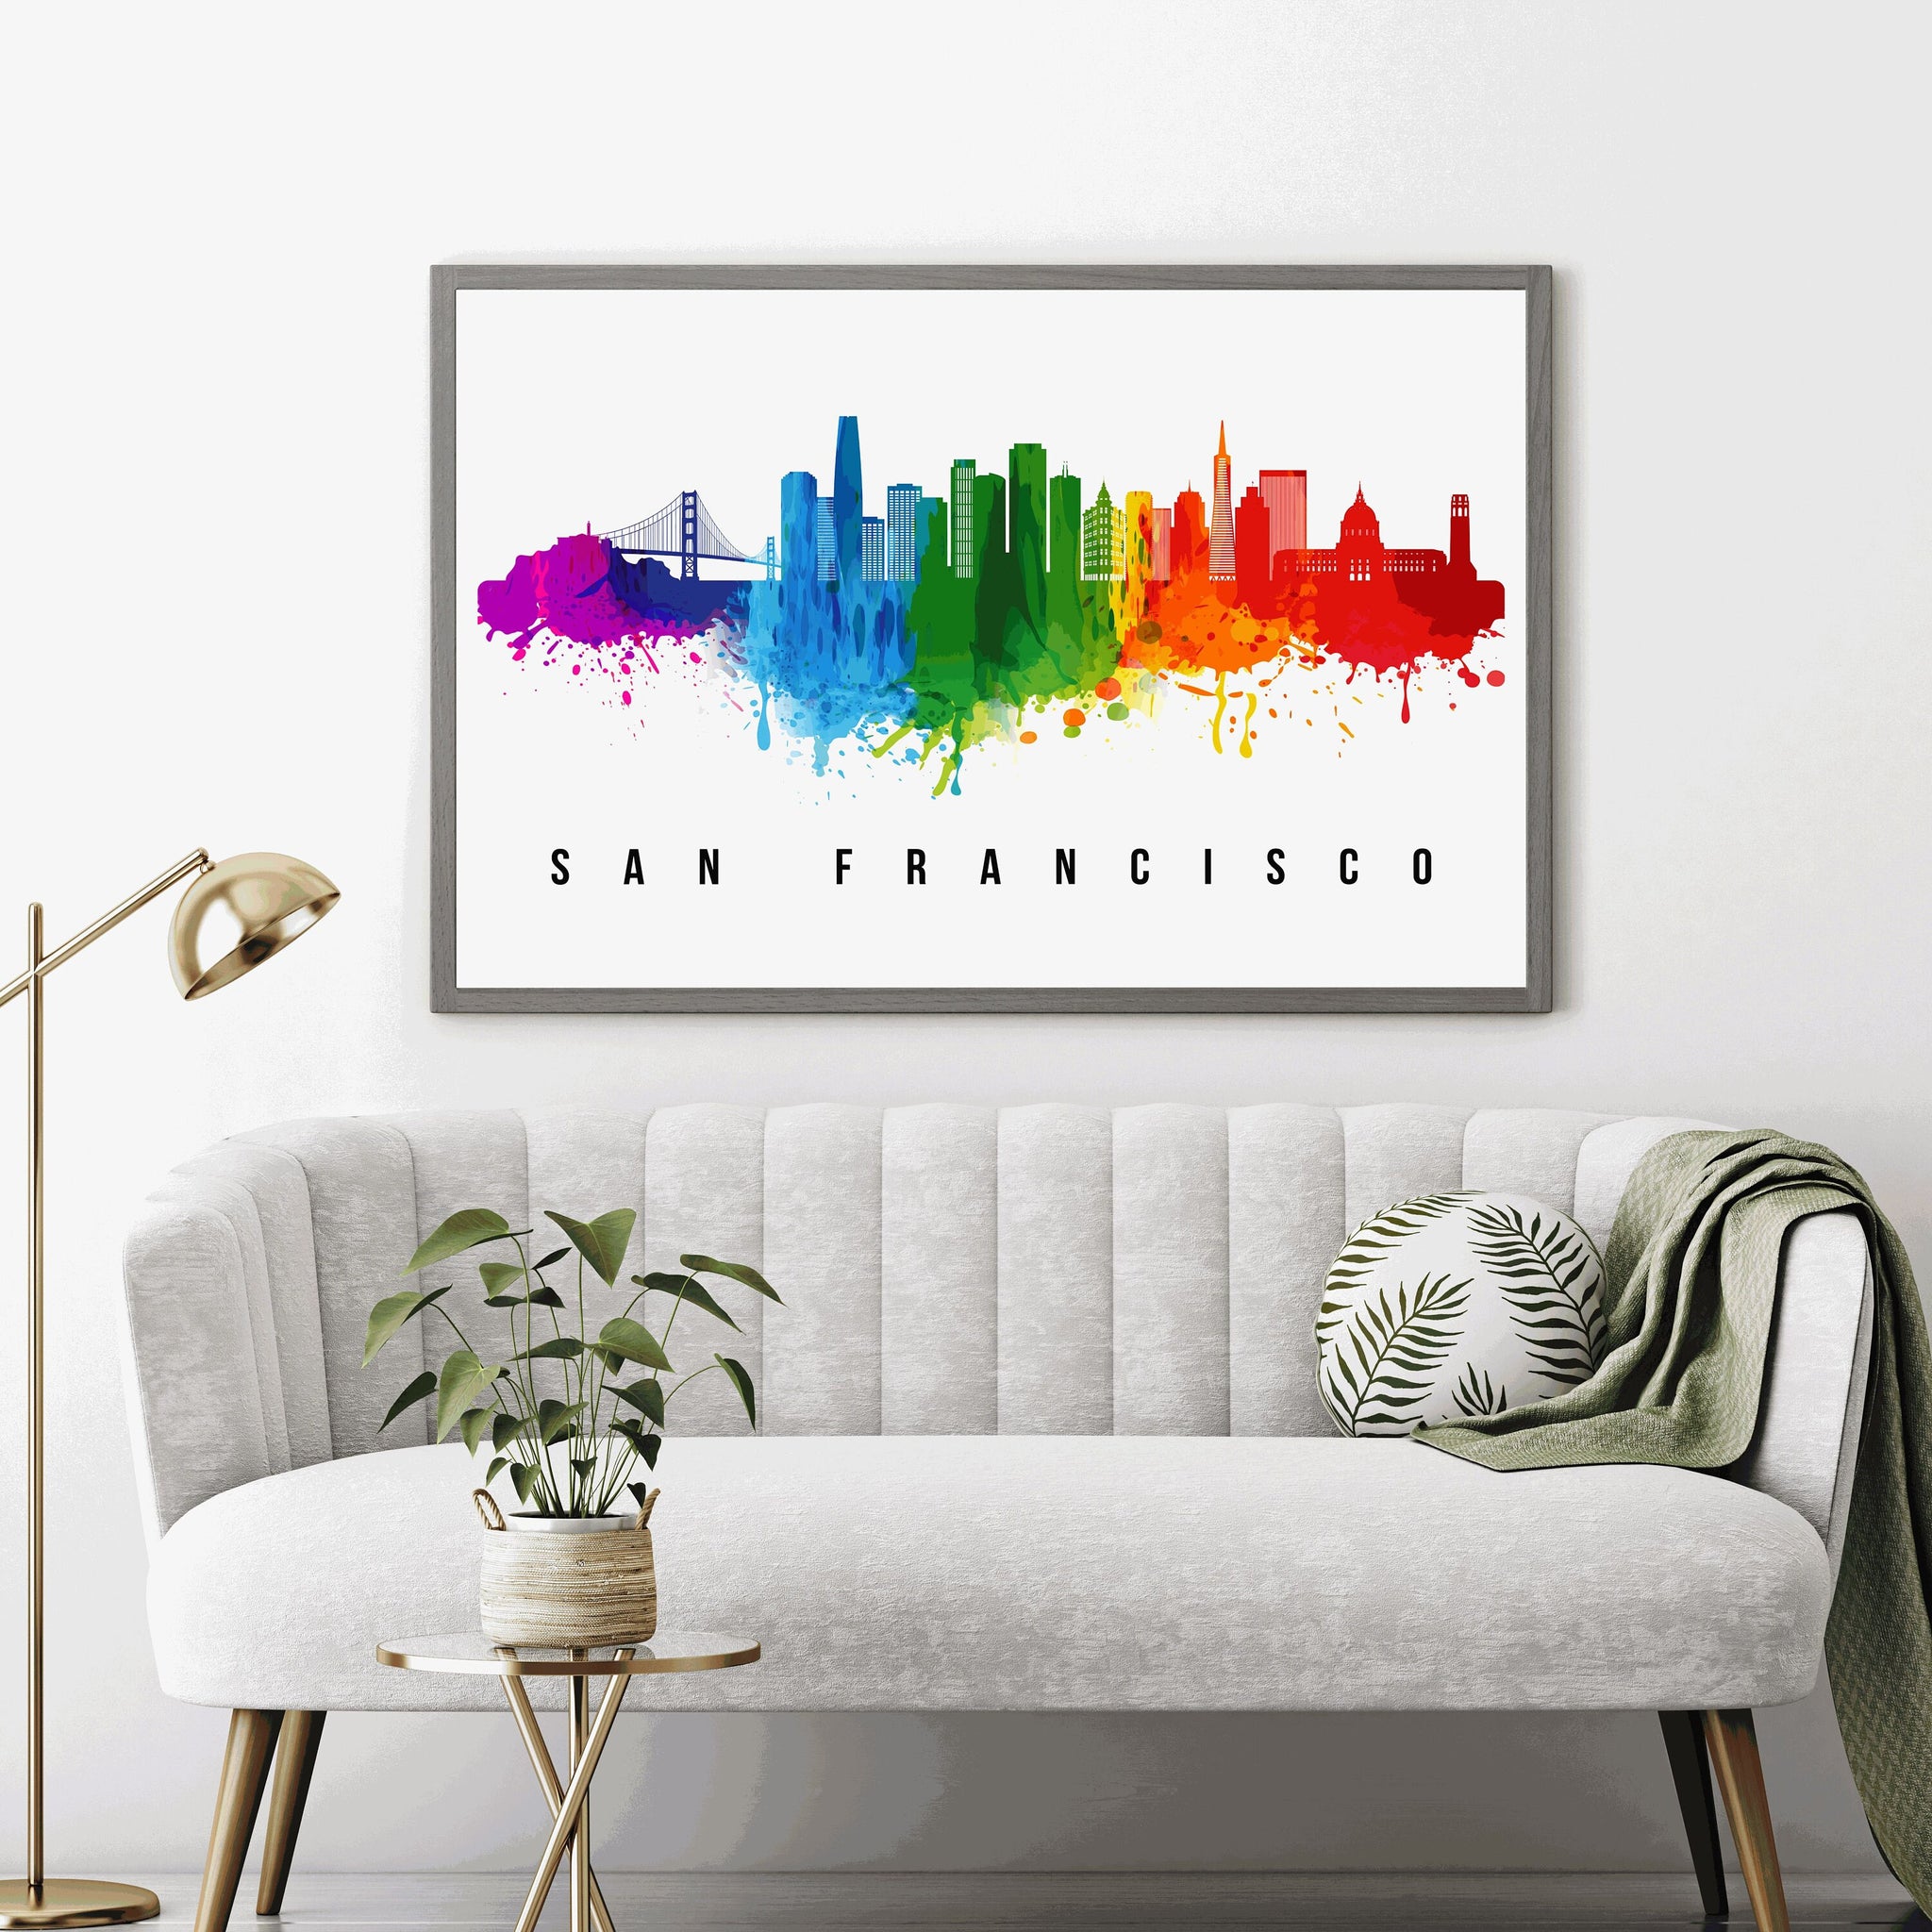 San Francisco - California  Skyline Poster, San Francisco Cityscape Painting, Landmark and Cityscape Print, Home and Office Wall Art